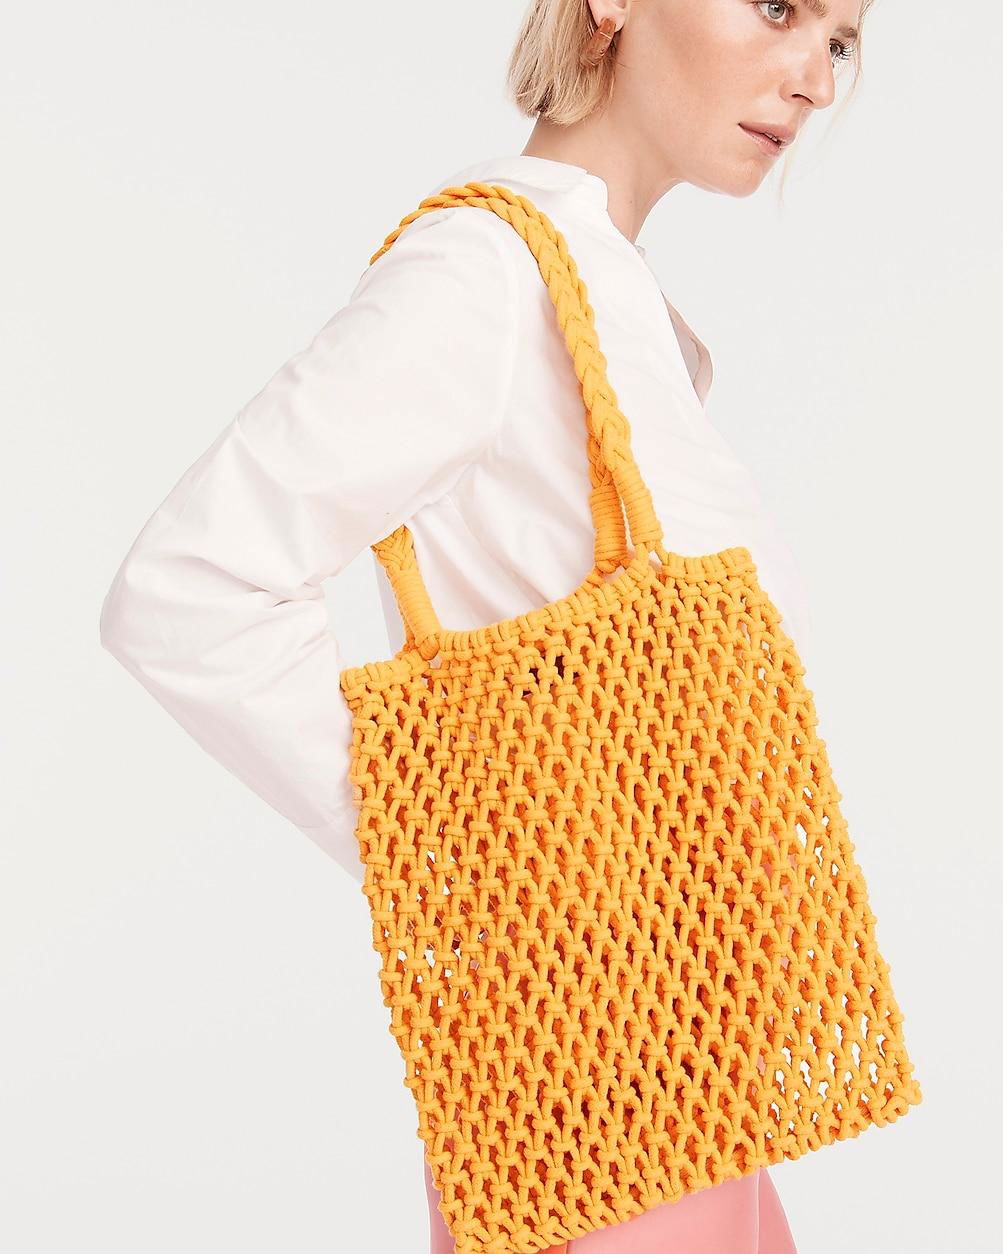 Cadiz hand-knotted rope tote by J.CREW